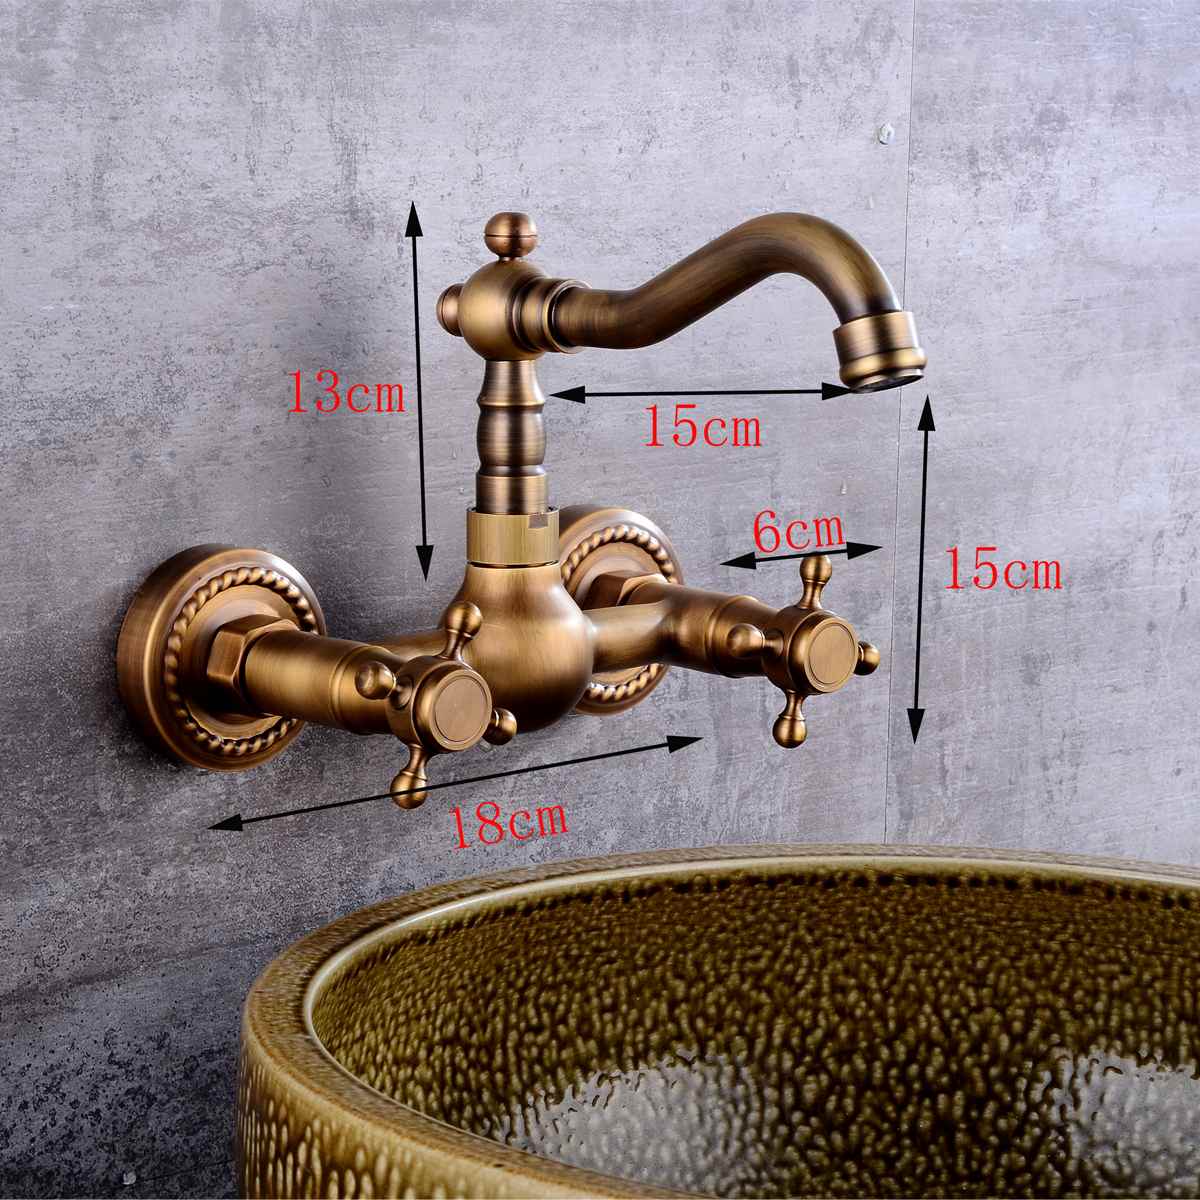 Antique Brass 360 Rotation Double Handle Kitchen Sink Faucet Wall Mounted Crane Bathroom Basin Cold And Hot Mixer Tap - WELQUEEN